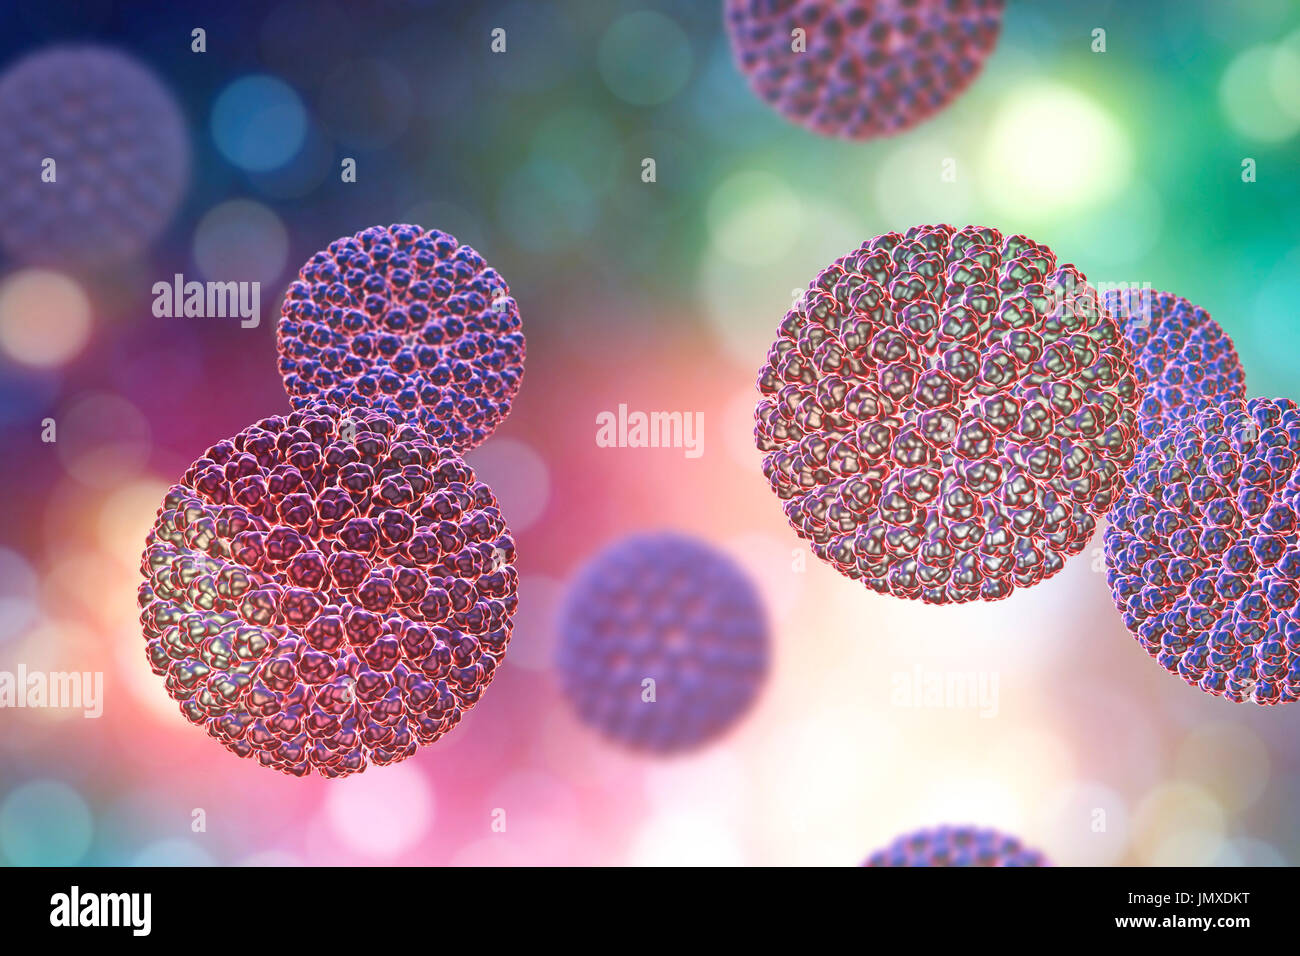 Rotavirus particle, computer illustration. The virus particle consists of an RNA (ribonucleic acid) core surrounded by a triple layered capsid. Rotaviruses are probably the most common viruses to infect humans and animals. They are associated with gastroenteritis and diarrhoea - typically infecting the intestines of children aged from 6 months to 3 years. The viruses are spread in faeces. Stock Photo